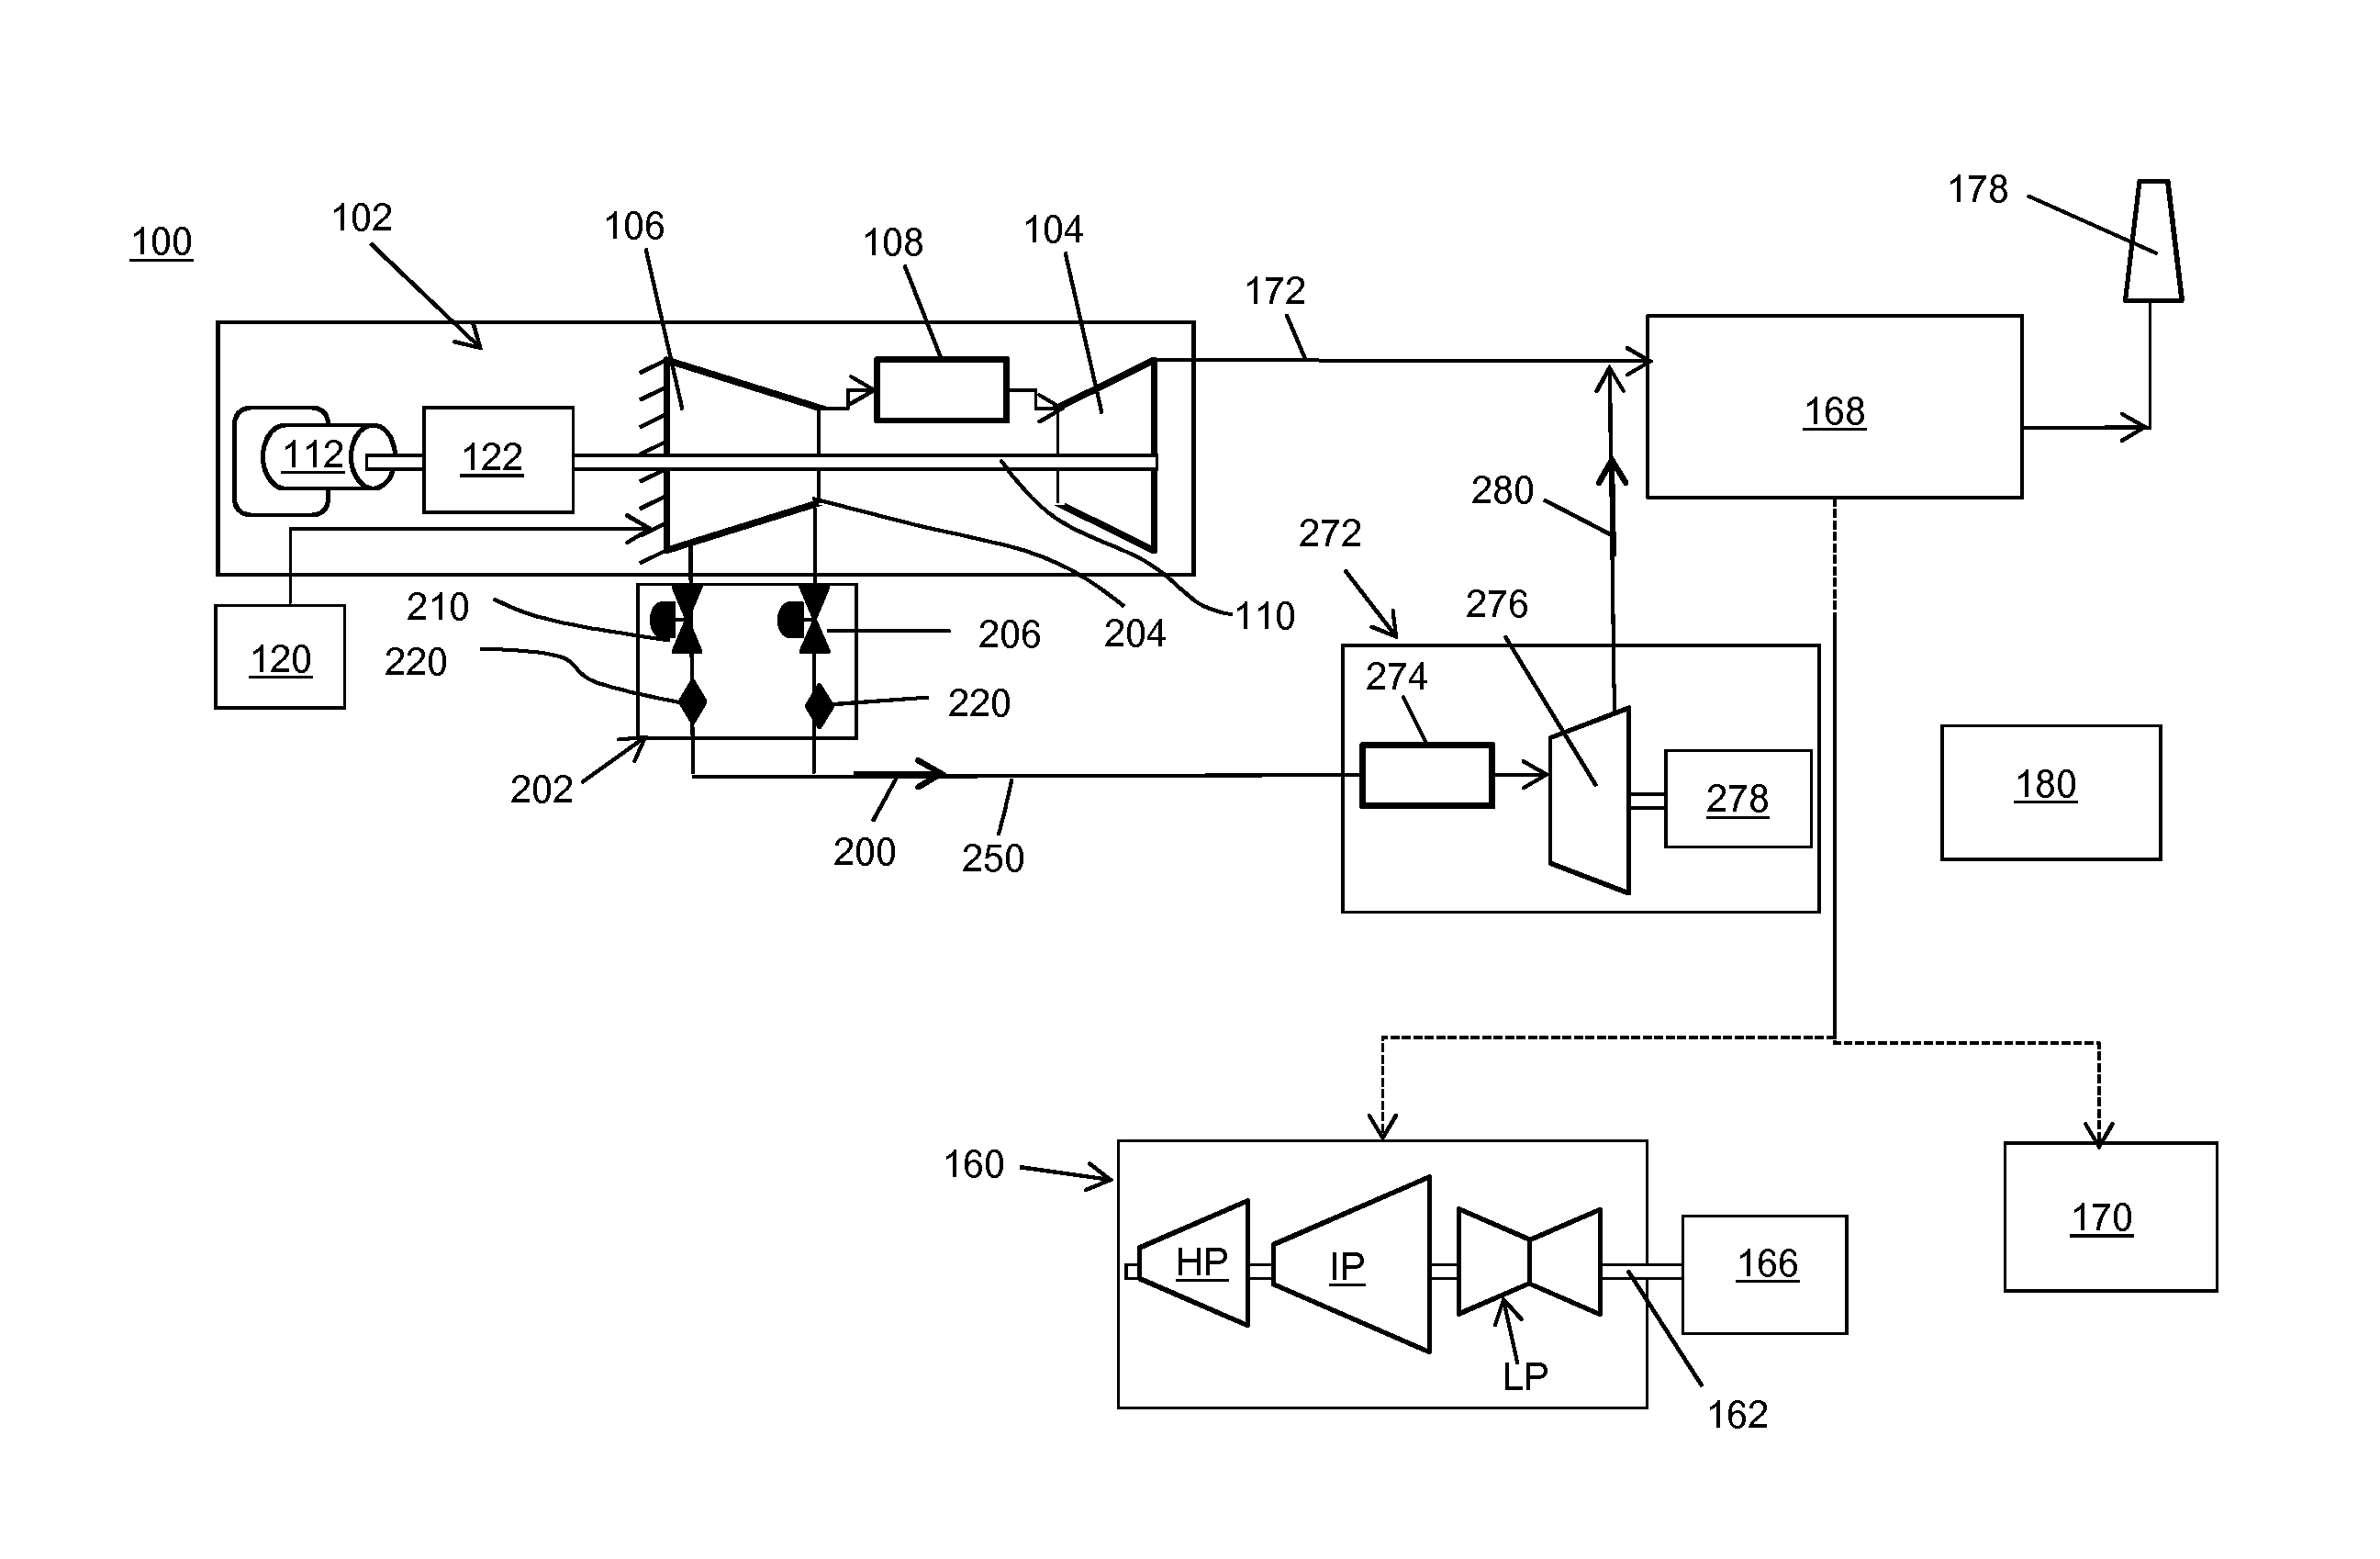 Power generation system having compressor creating excess gas flow for supplemental gas turbine system